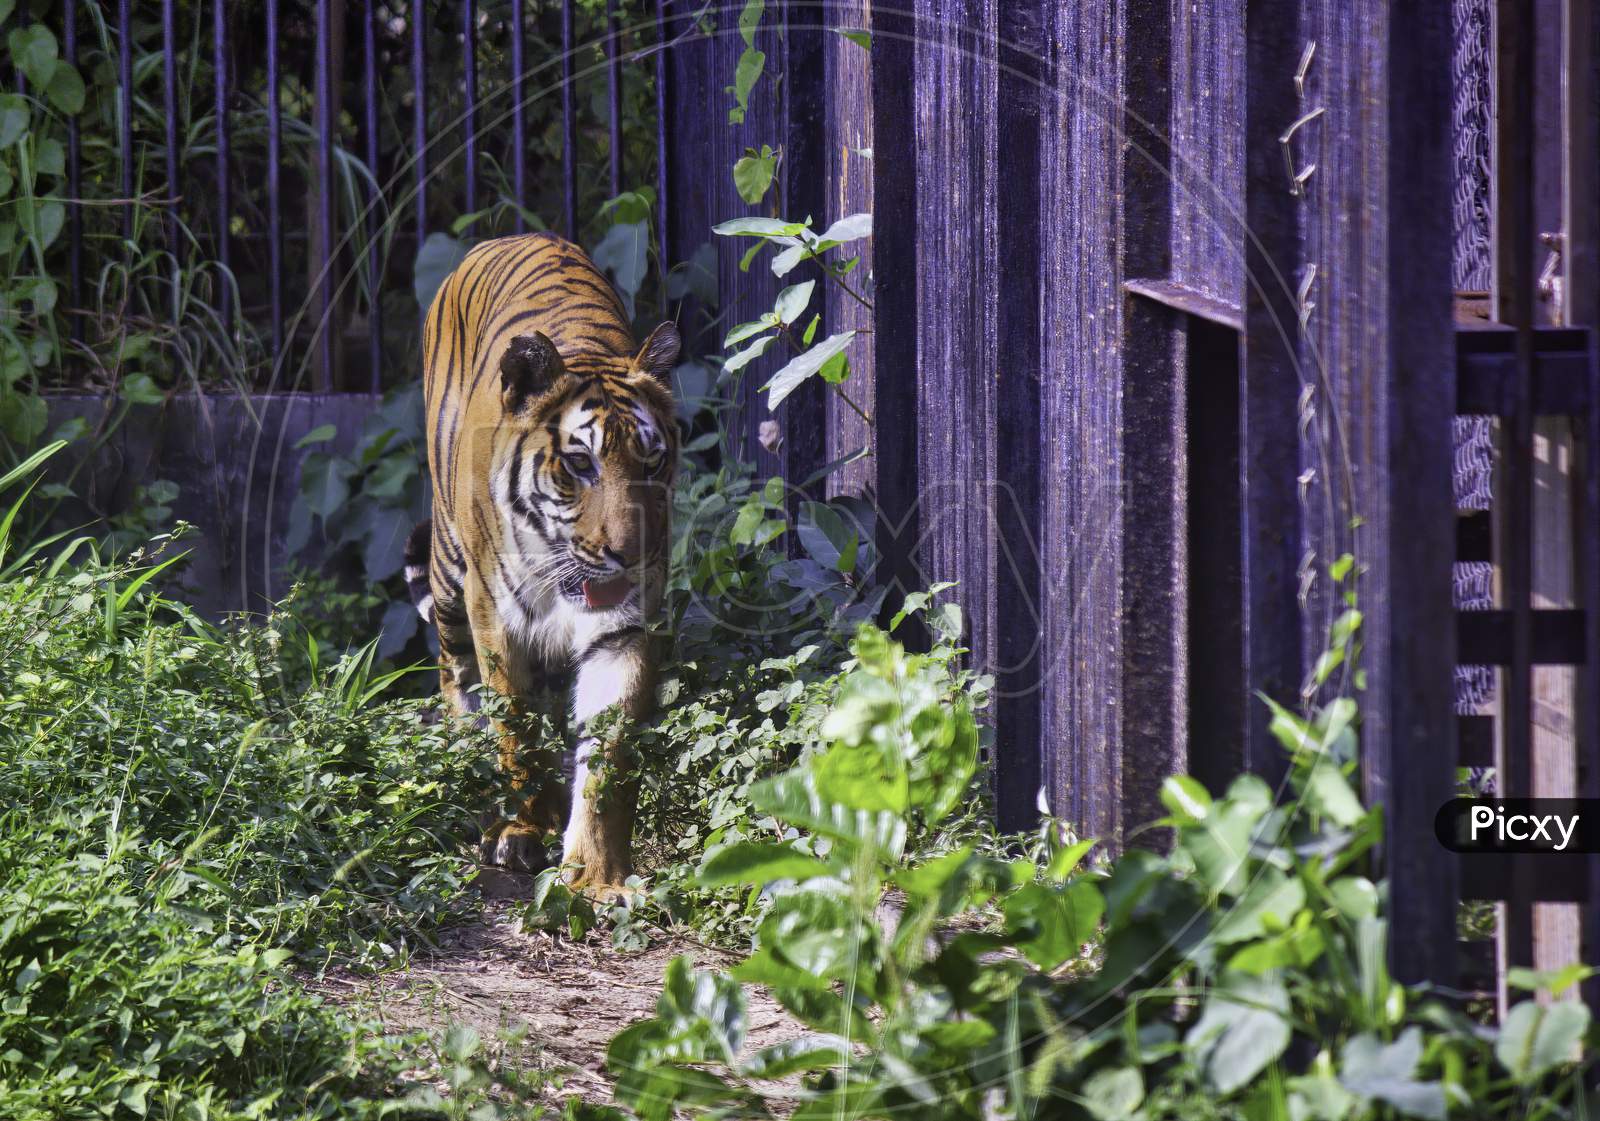 A Fierce Indian Tiger Walks Next To The Iron Cage In India